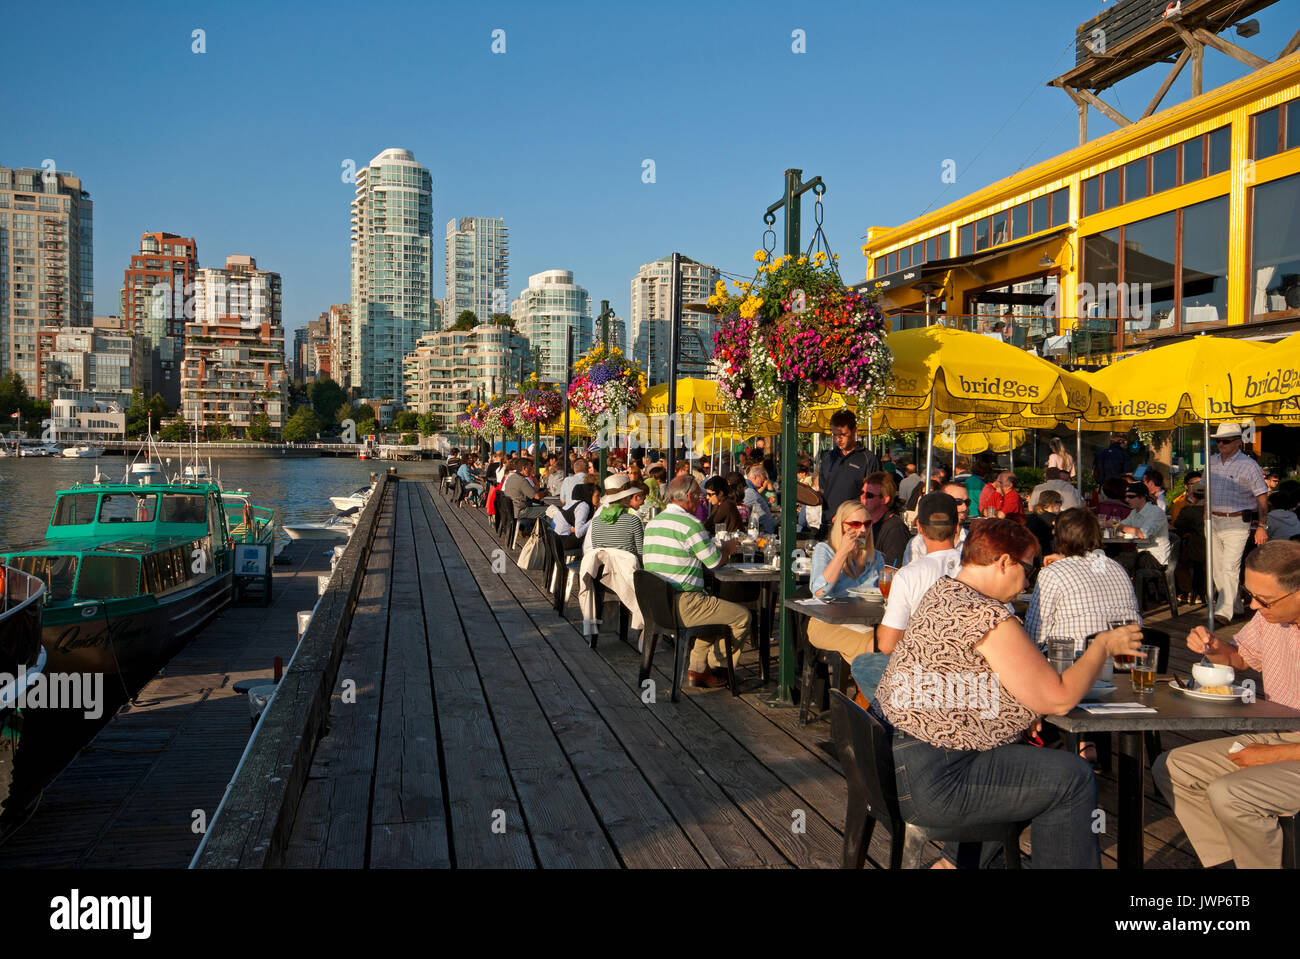 People dining on the terrace of the Bridges Restaurant, Granville Island, skyscrapers in the background, Vancouver, Canada Stock Photo